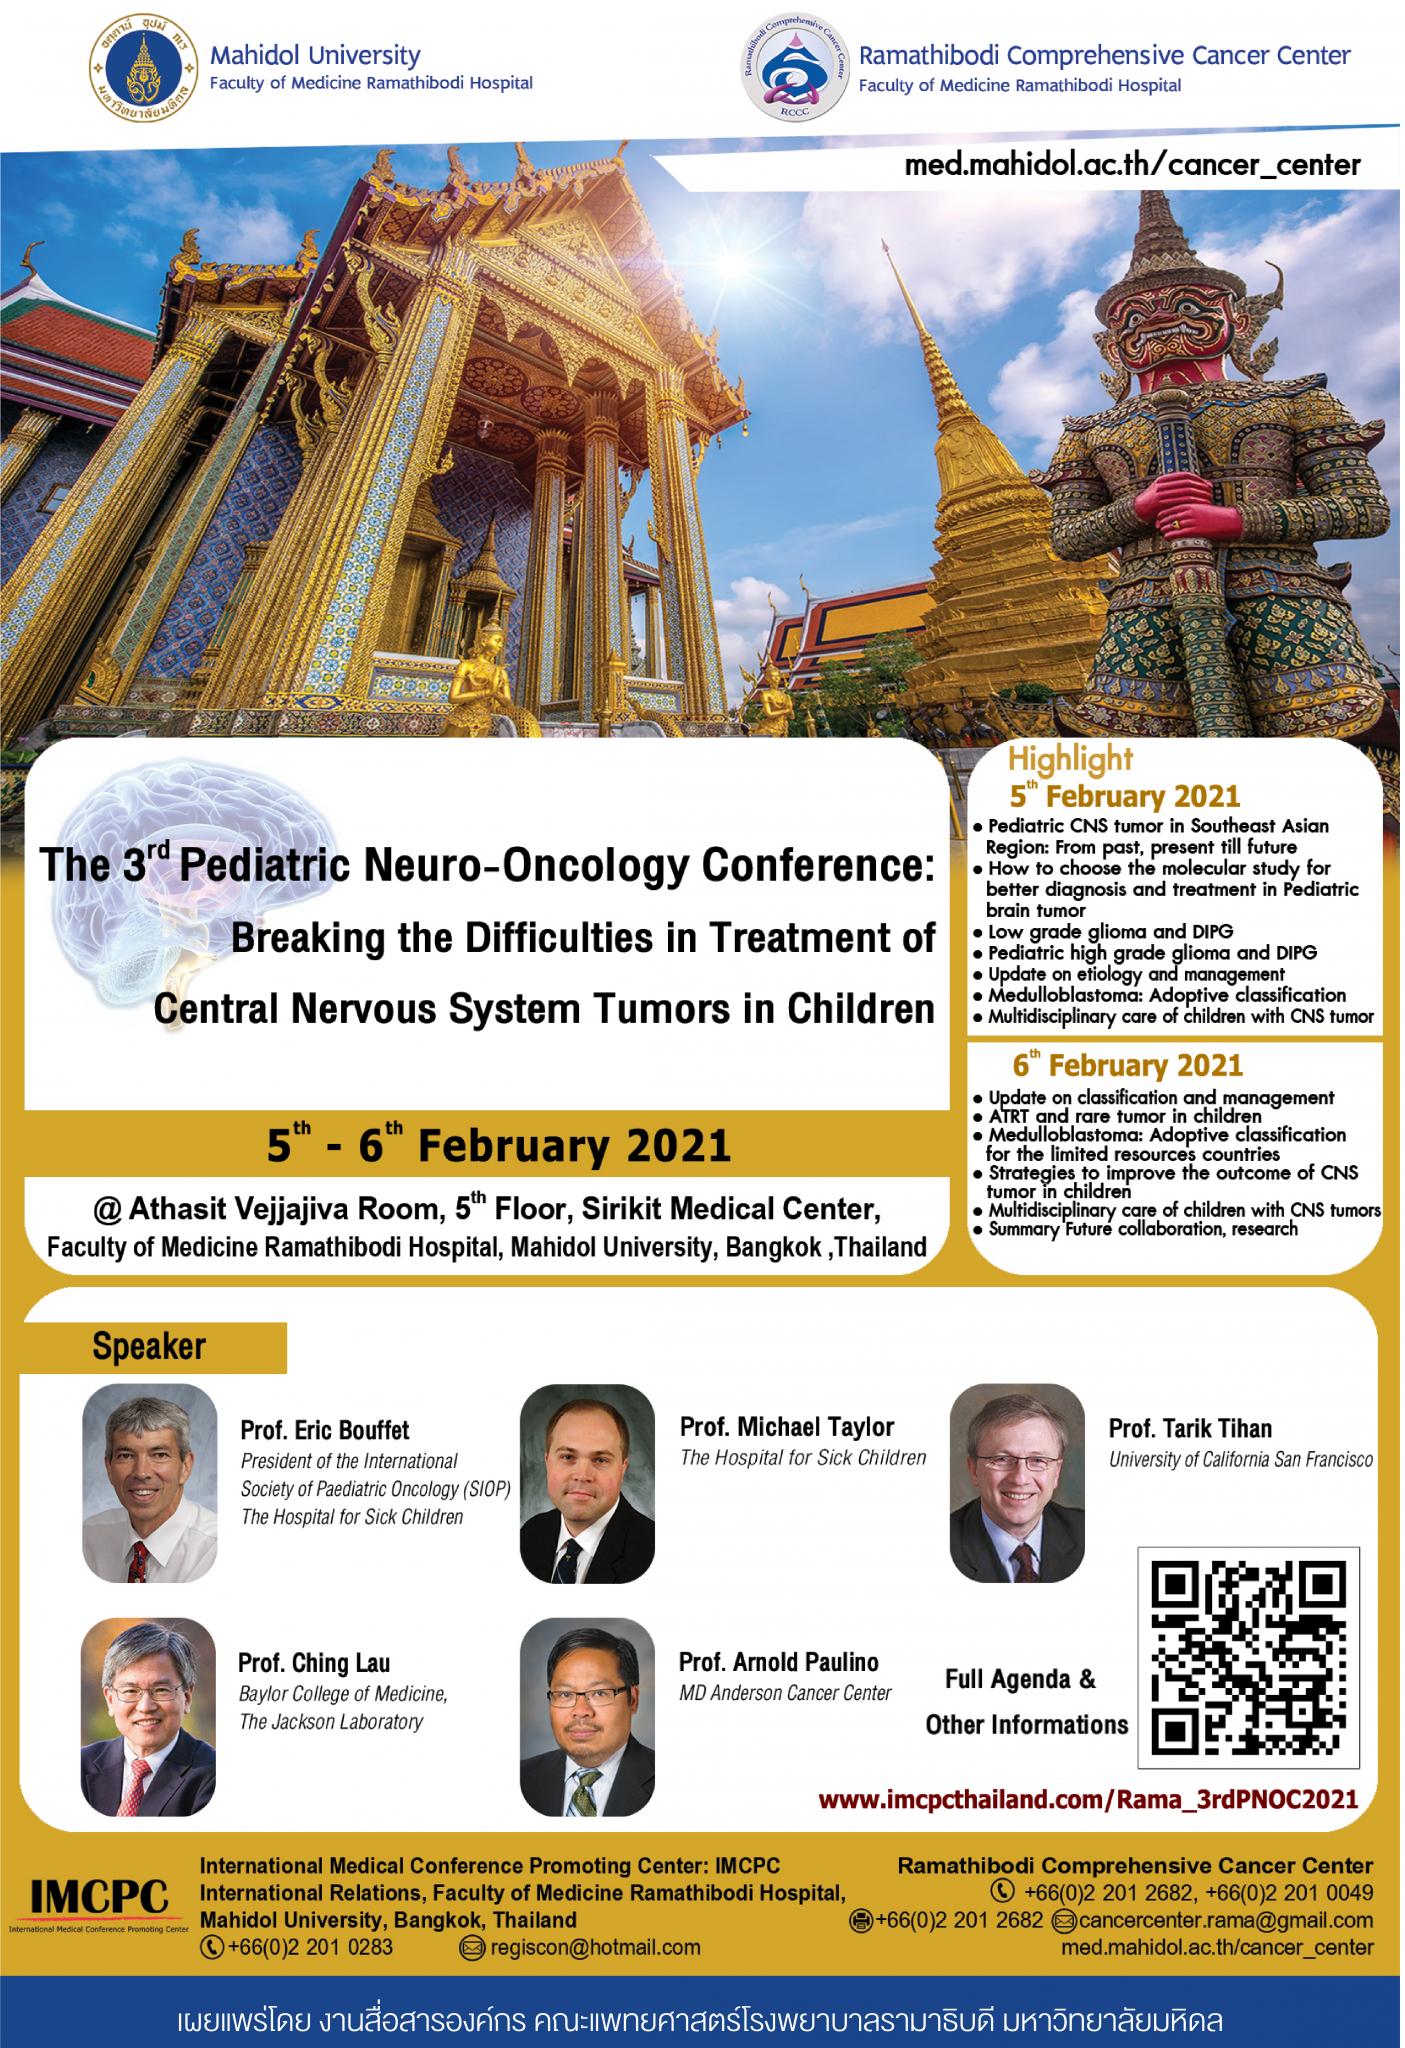 The 3rd Pediatric Neuro-Oncology Conference: Breaking the Difficulty in Treatment of Central Nervous System Tumor in Children